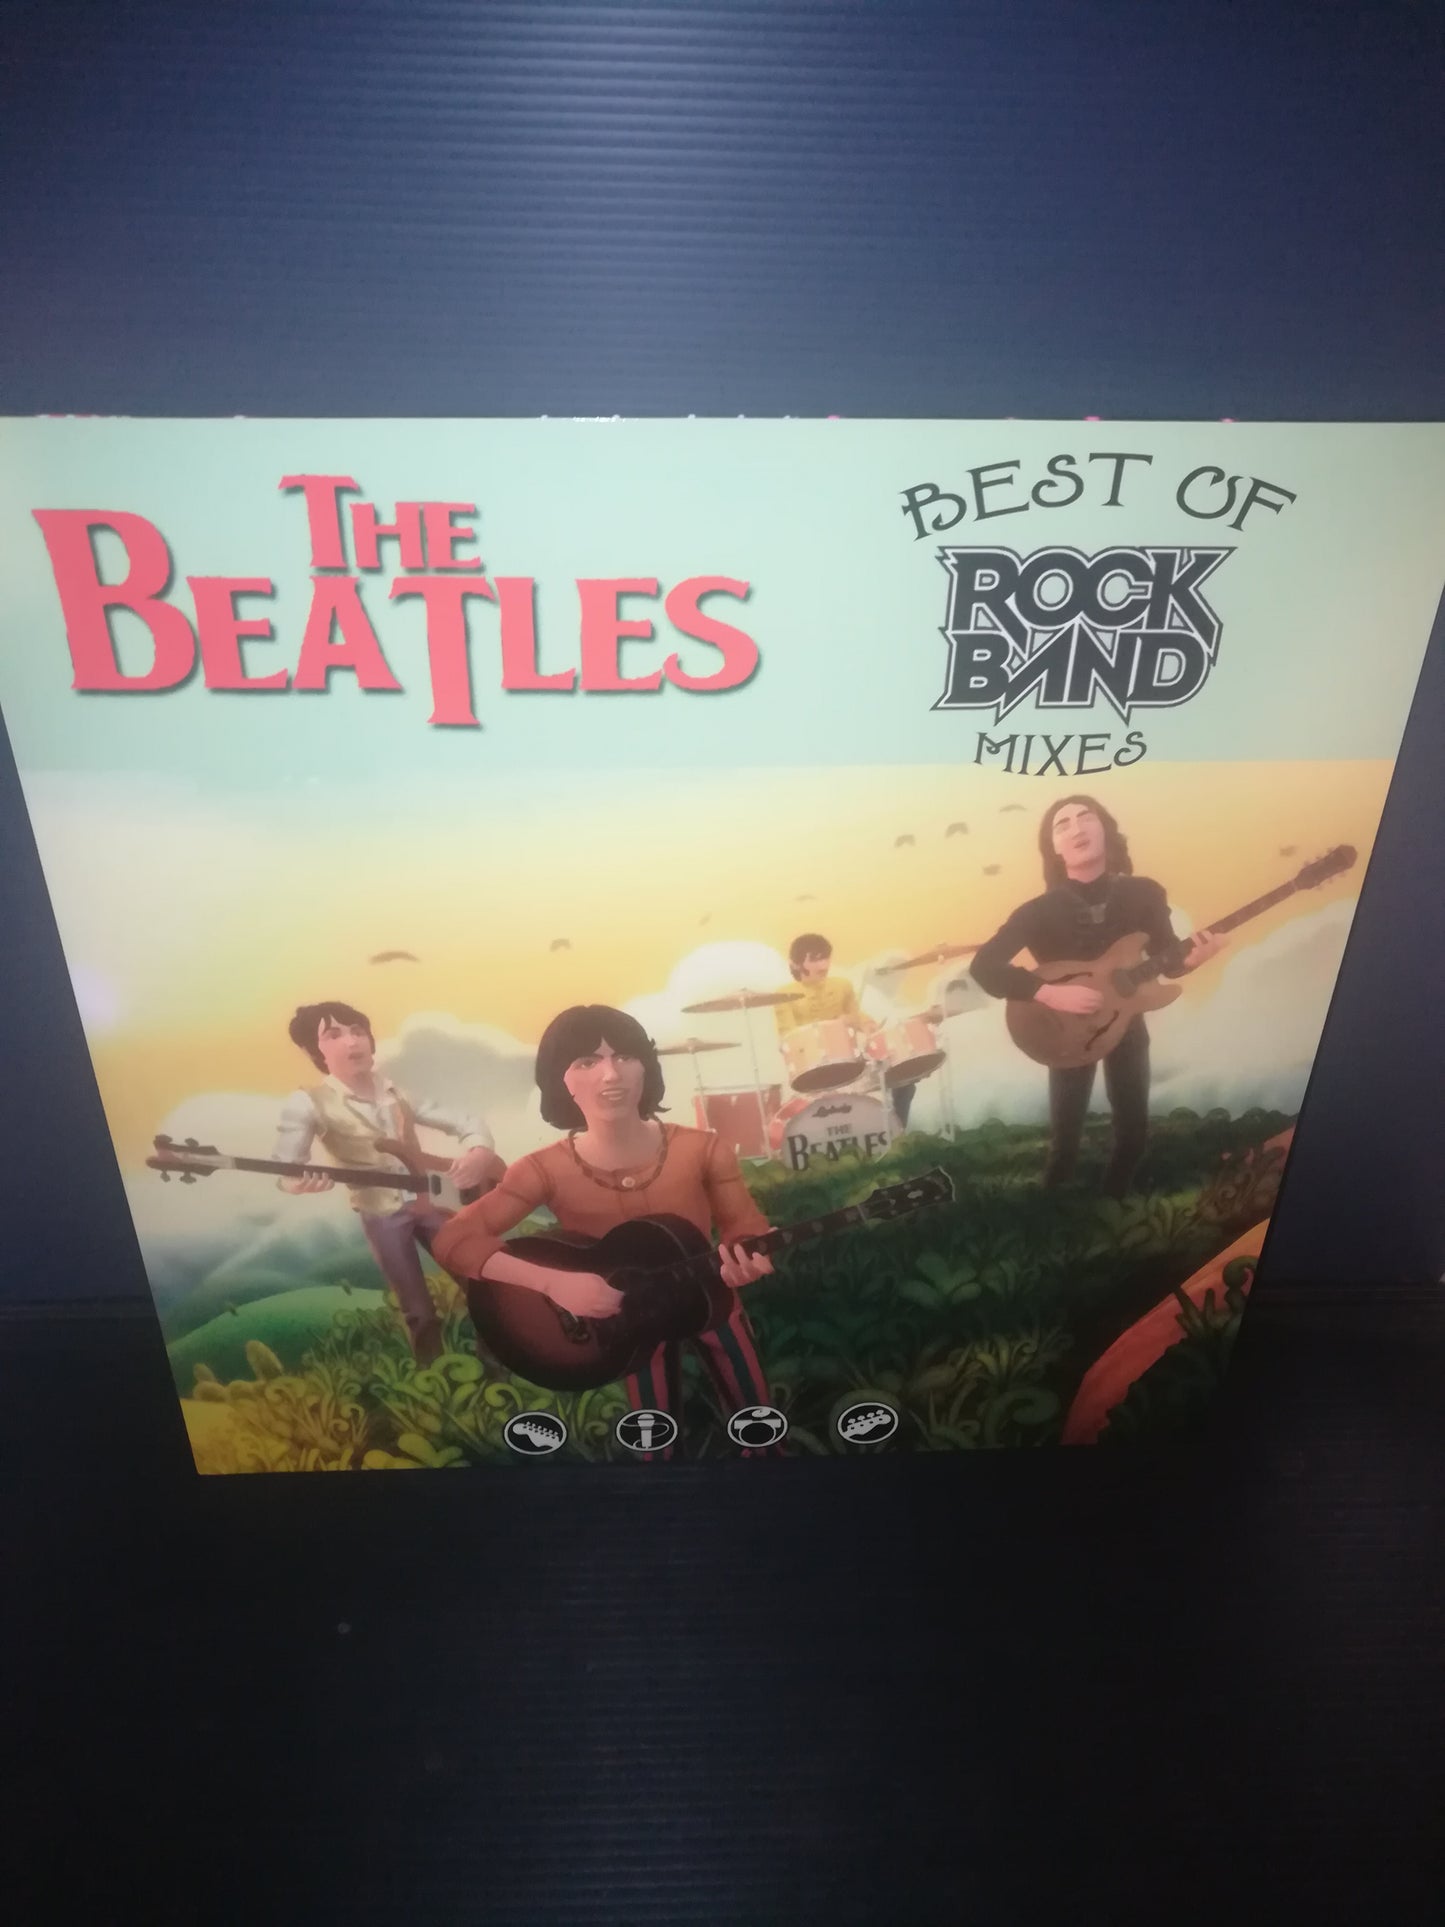 The Beatles Best of Rock Band Lp 33 Rpm